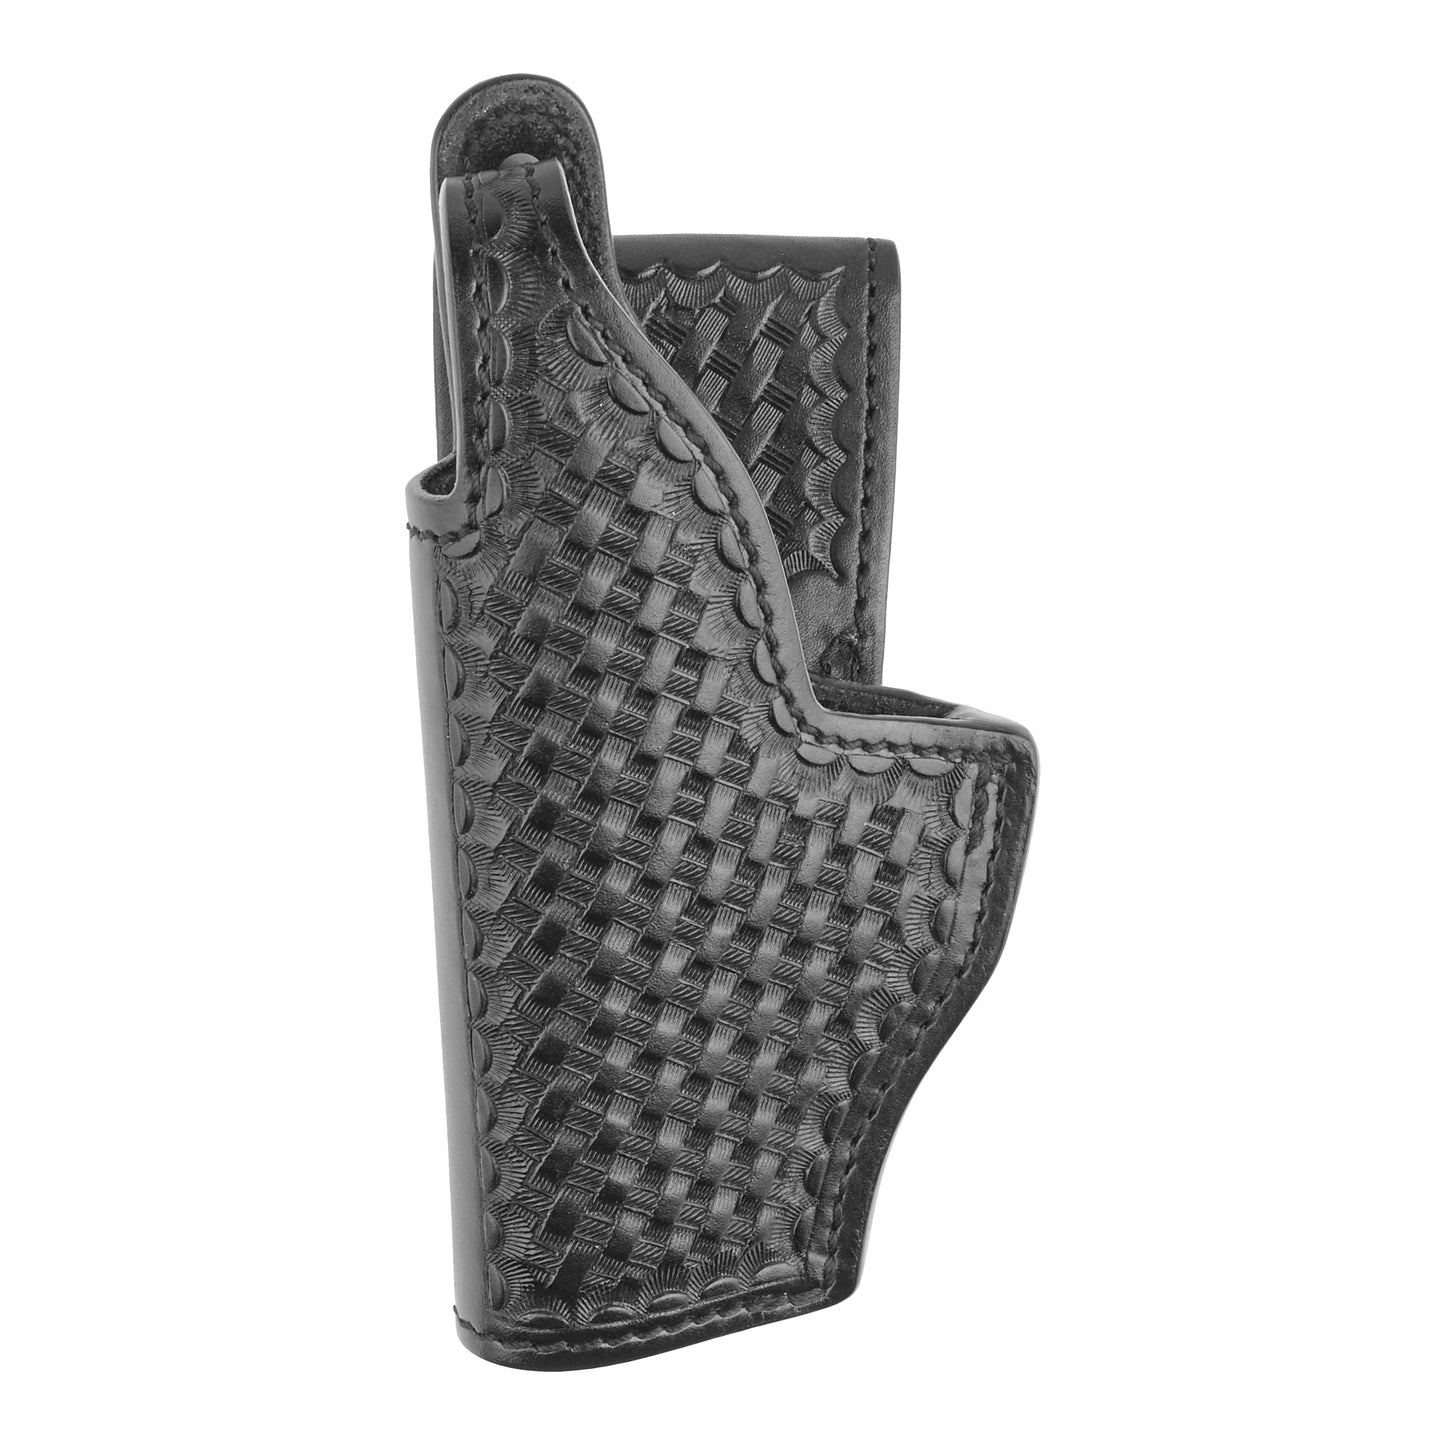 Basketweave Leather Mid Ride (Jacket Slot) Holster | Fits Glock 17/19/22, S&W Sigma, Sig 226, S&W 4026, and similar